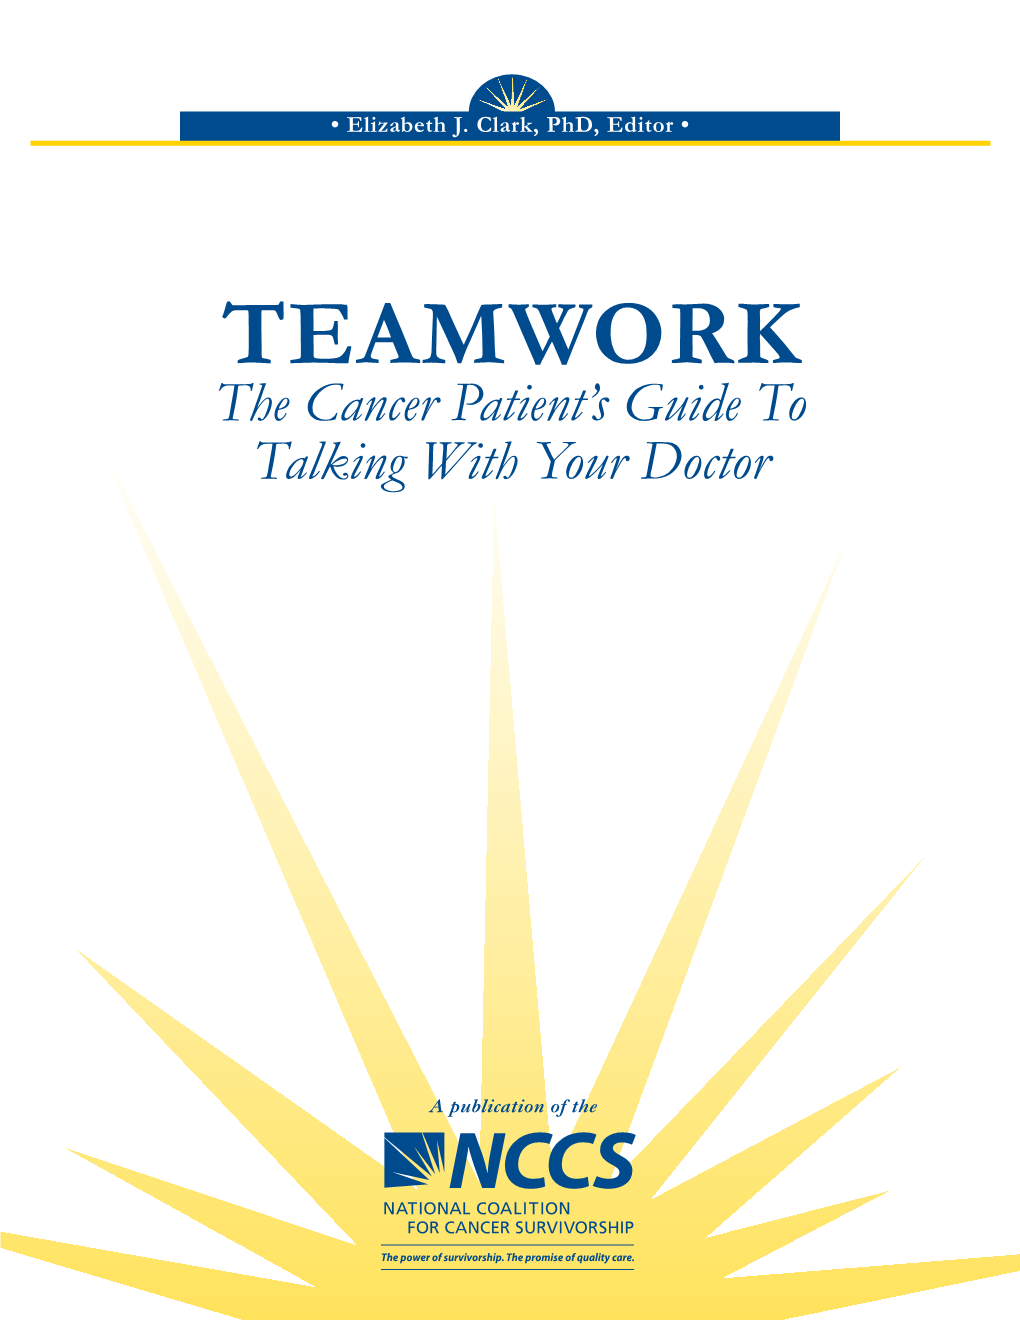 Teamwork the Cancer Patient’S Guide to Talking with Your Doctor